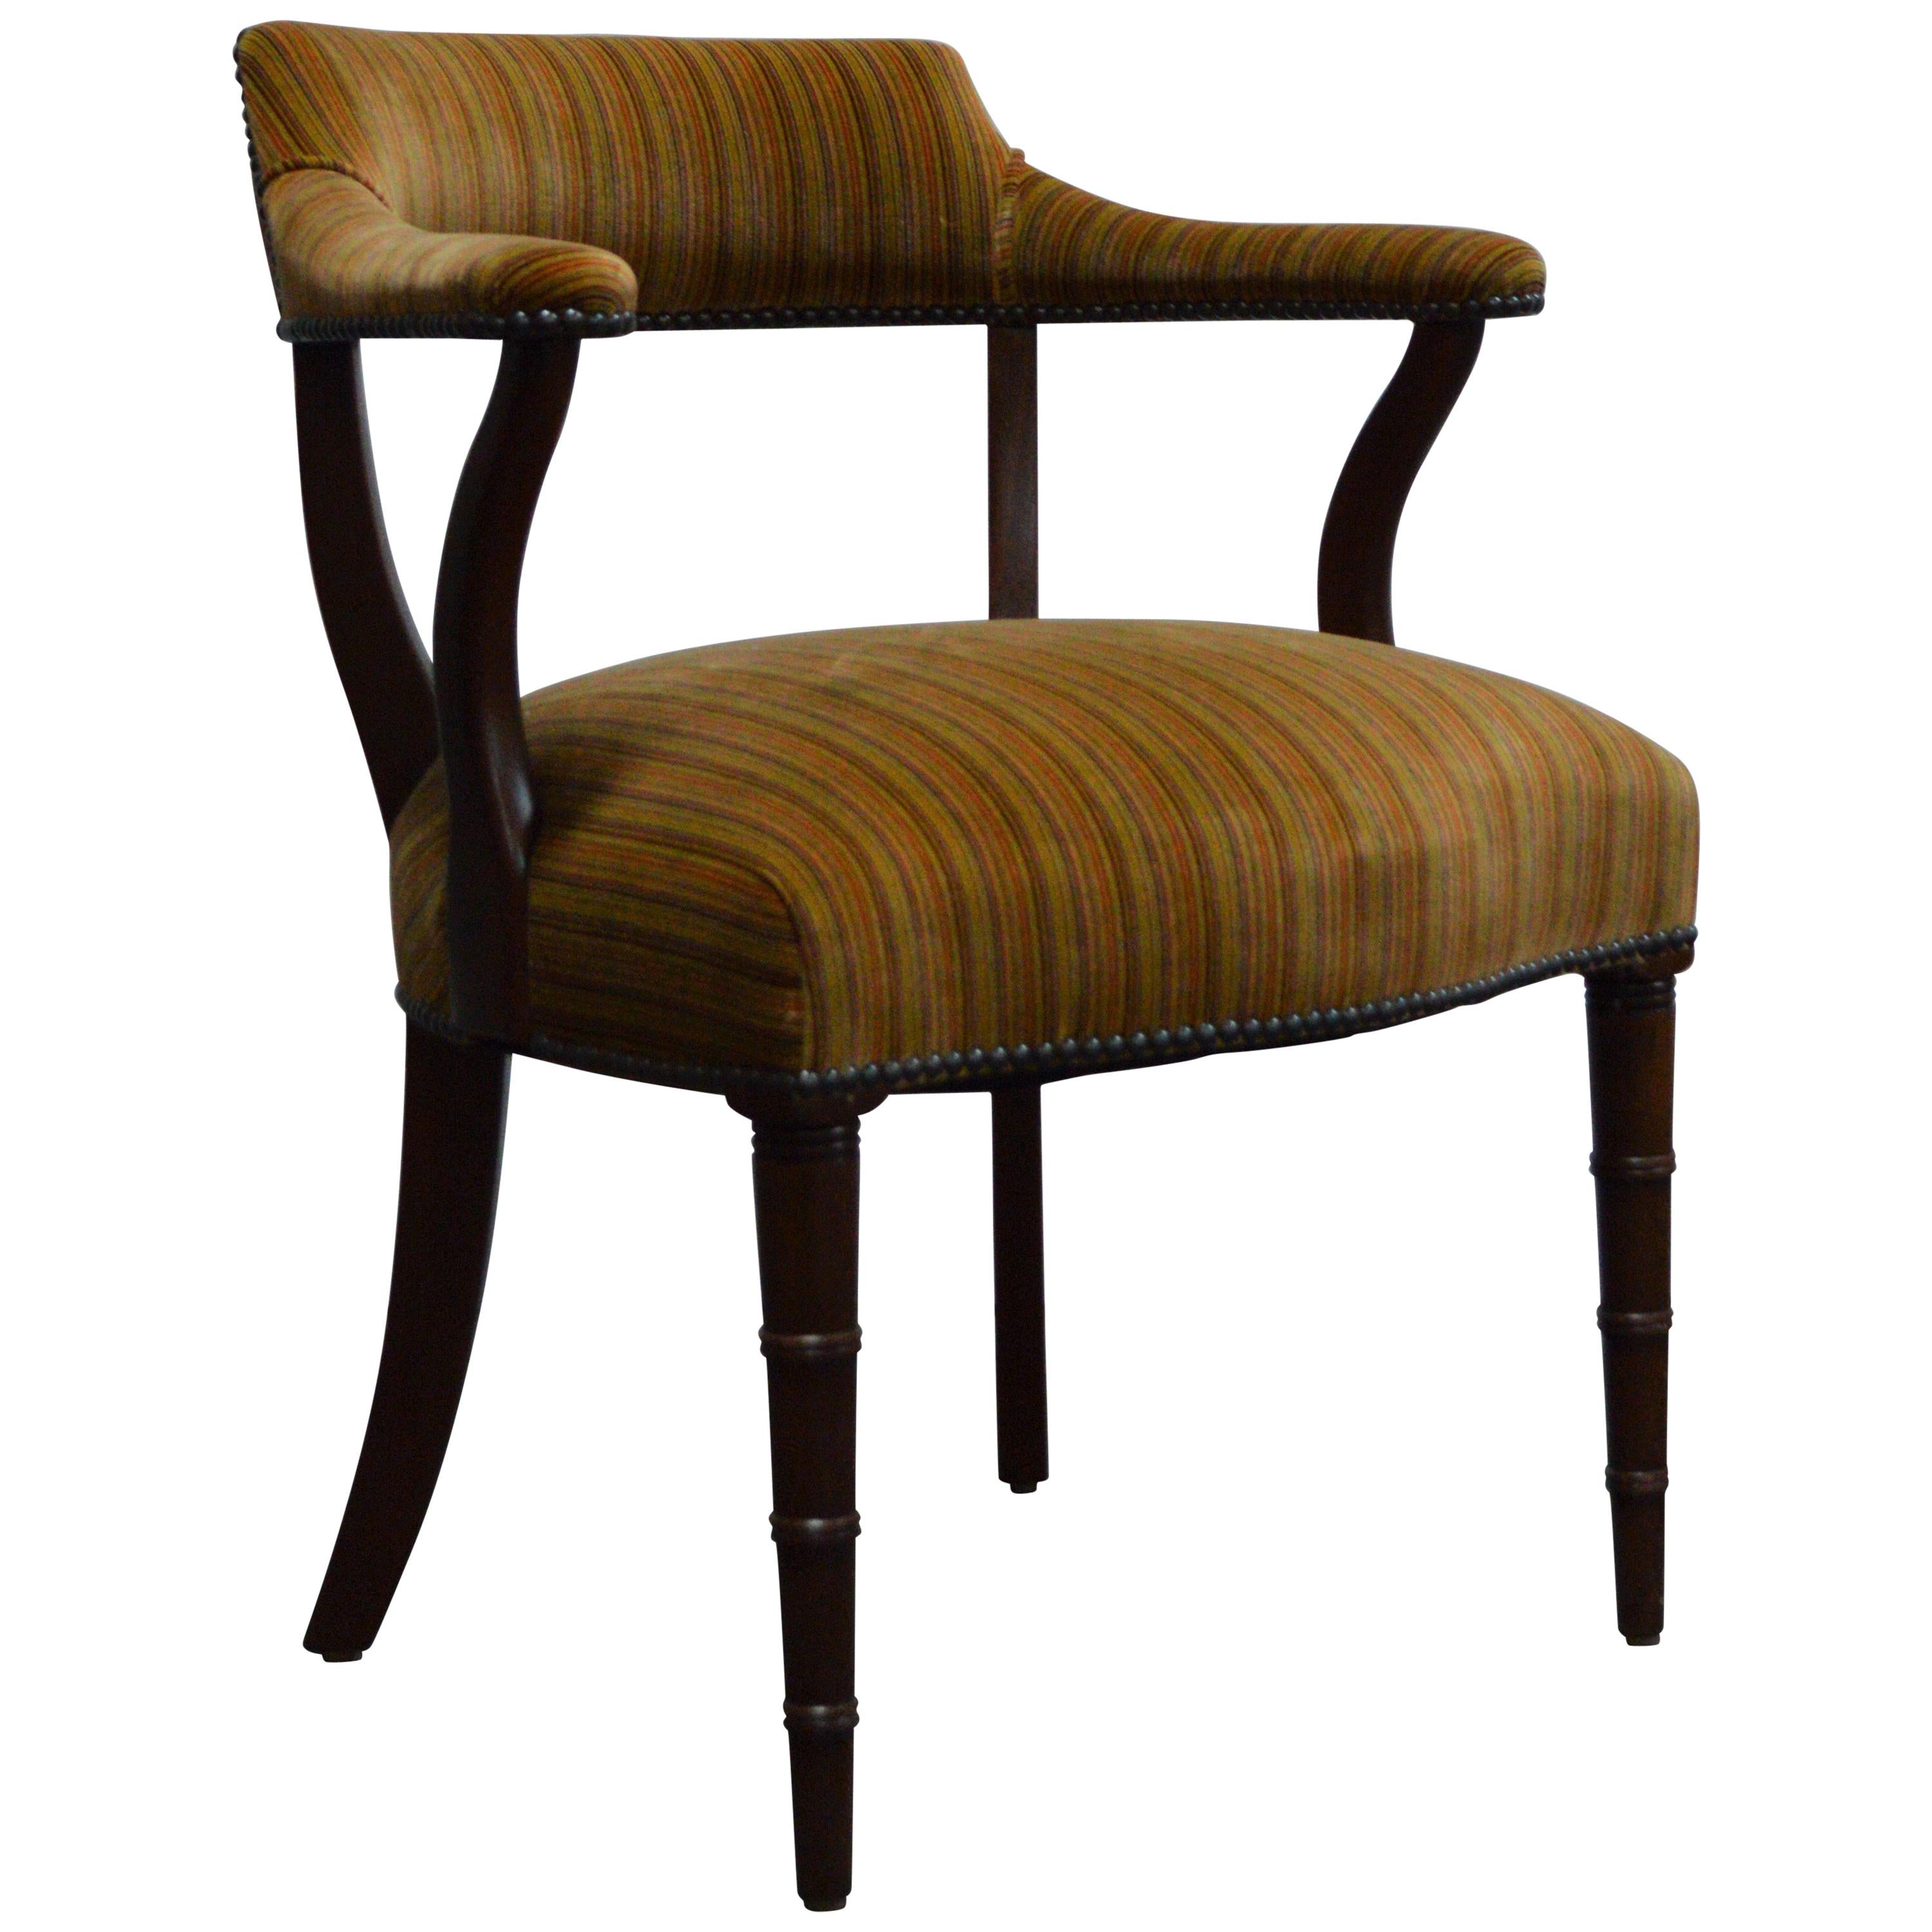 Midcentury Mahogany Regency Style Barrel Library Chair with Faux Bamboo Legs